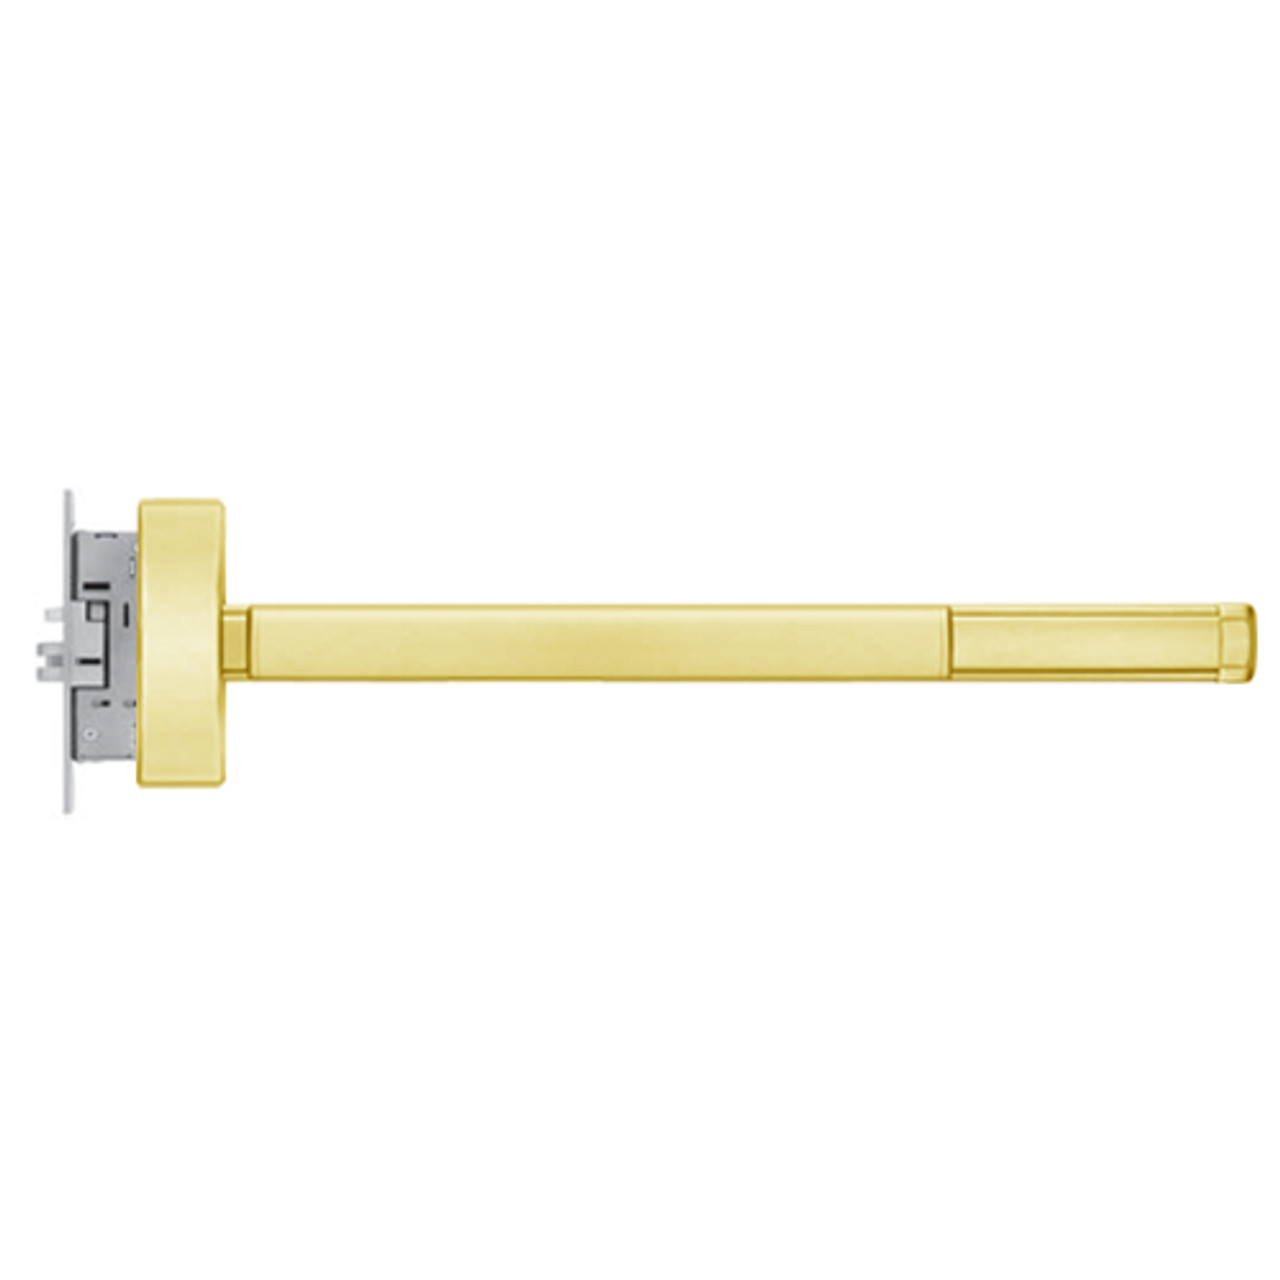 MLRFL2301-RHR-605-48 PHI 2300 Series Fire Rated Apex Mortise Exit Device with Motorized Latch Retraction Prepped for Cover Plate in Bright Brass Finish